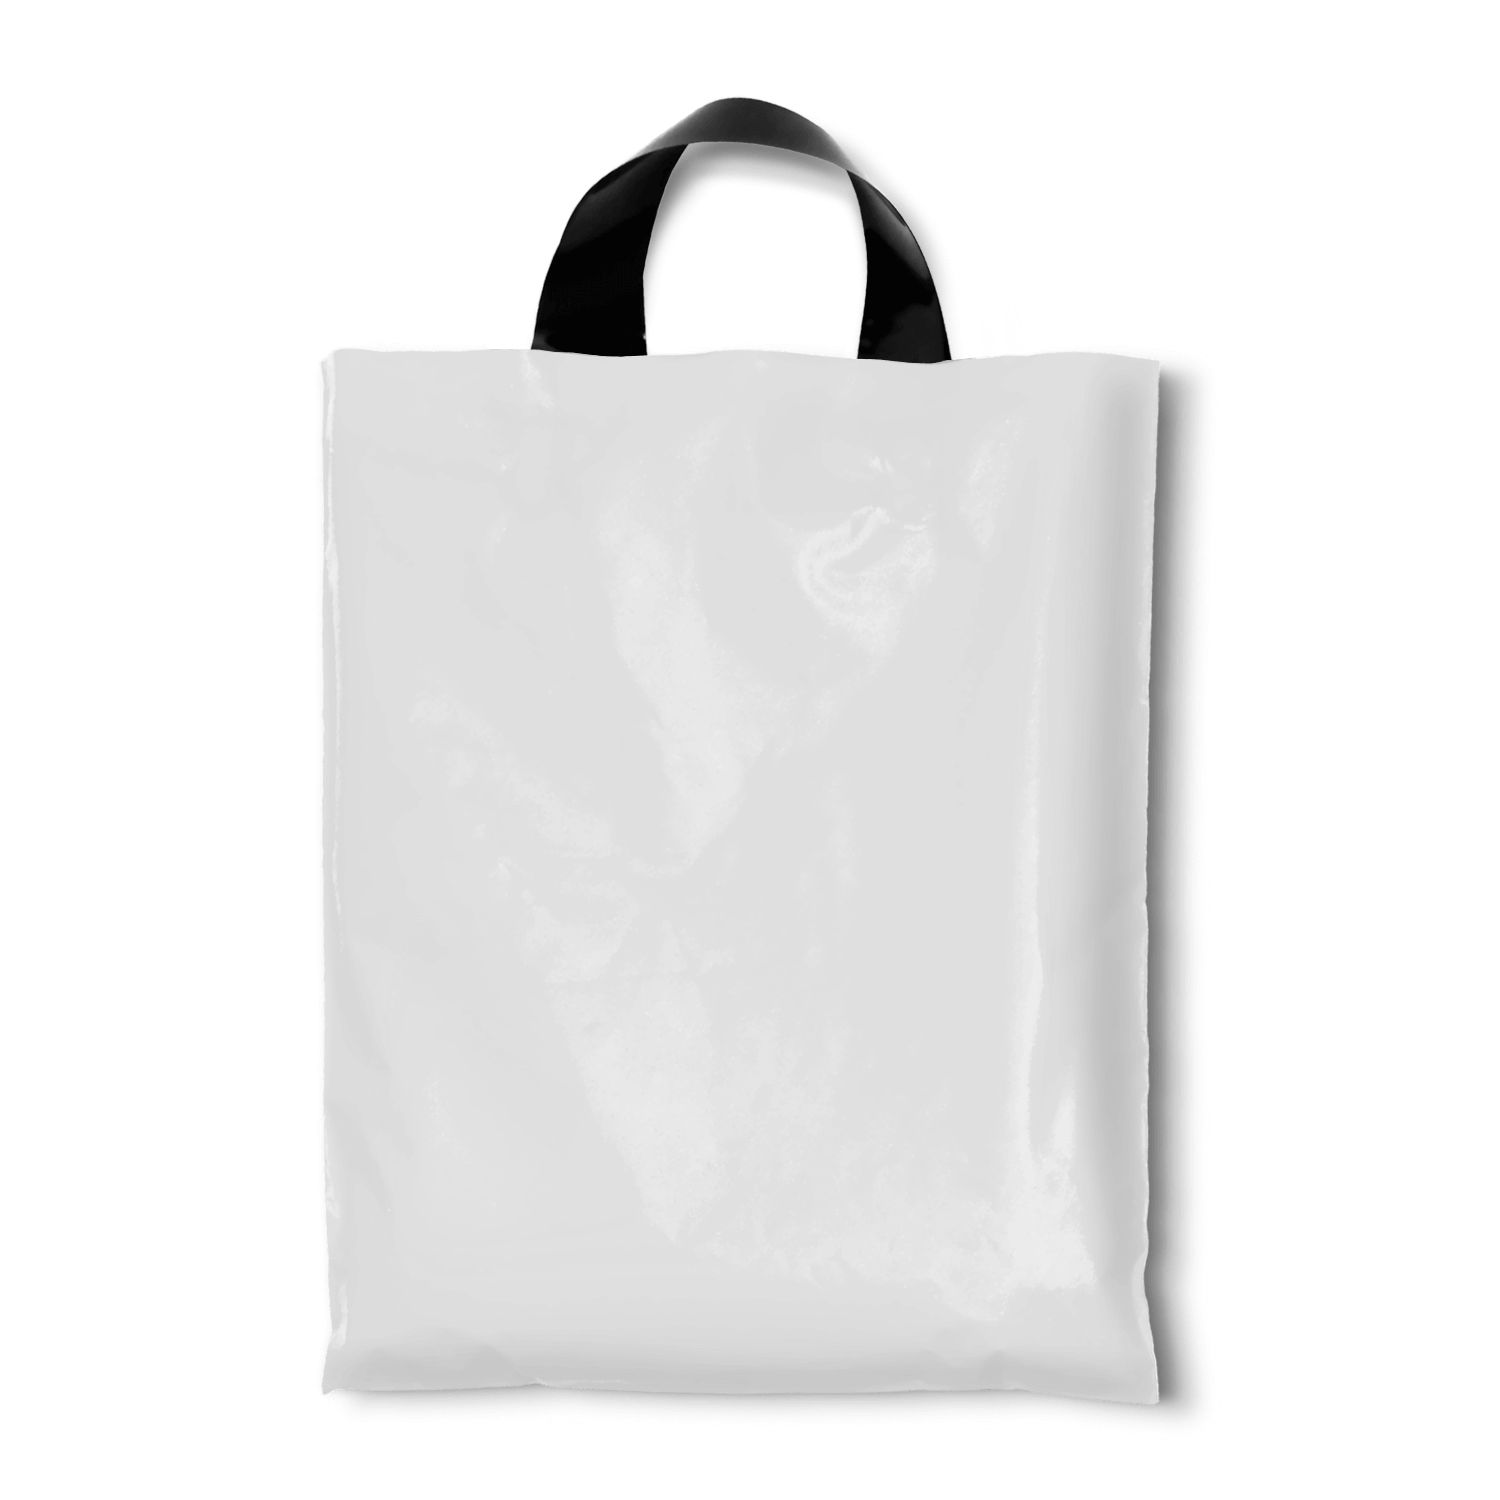 Discover more than 74 black plastic bags with handles latest ...